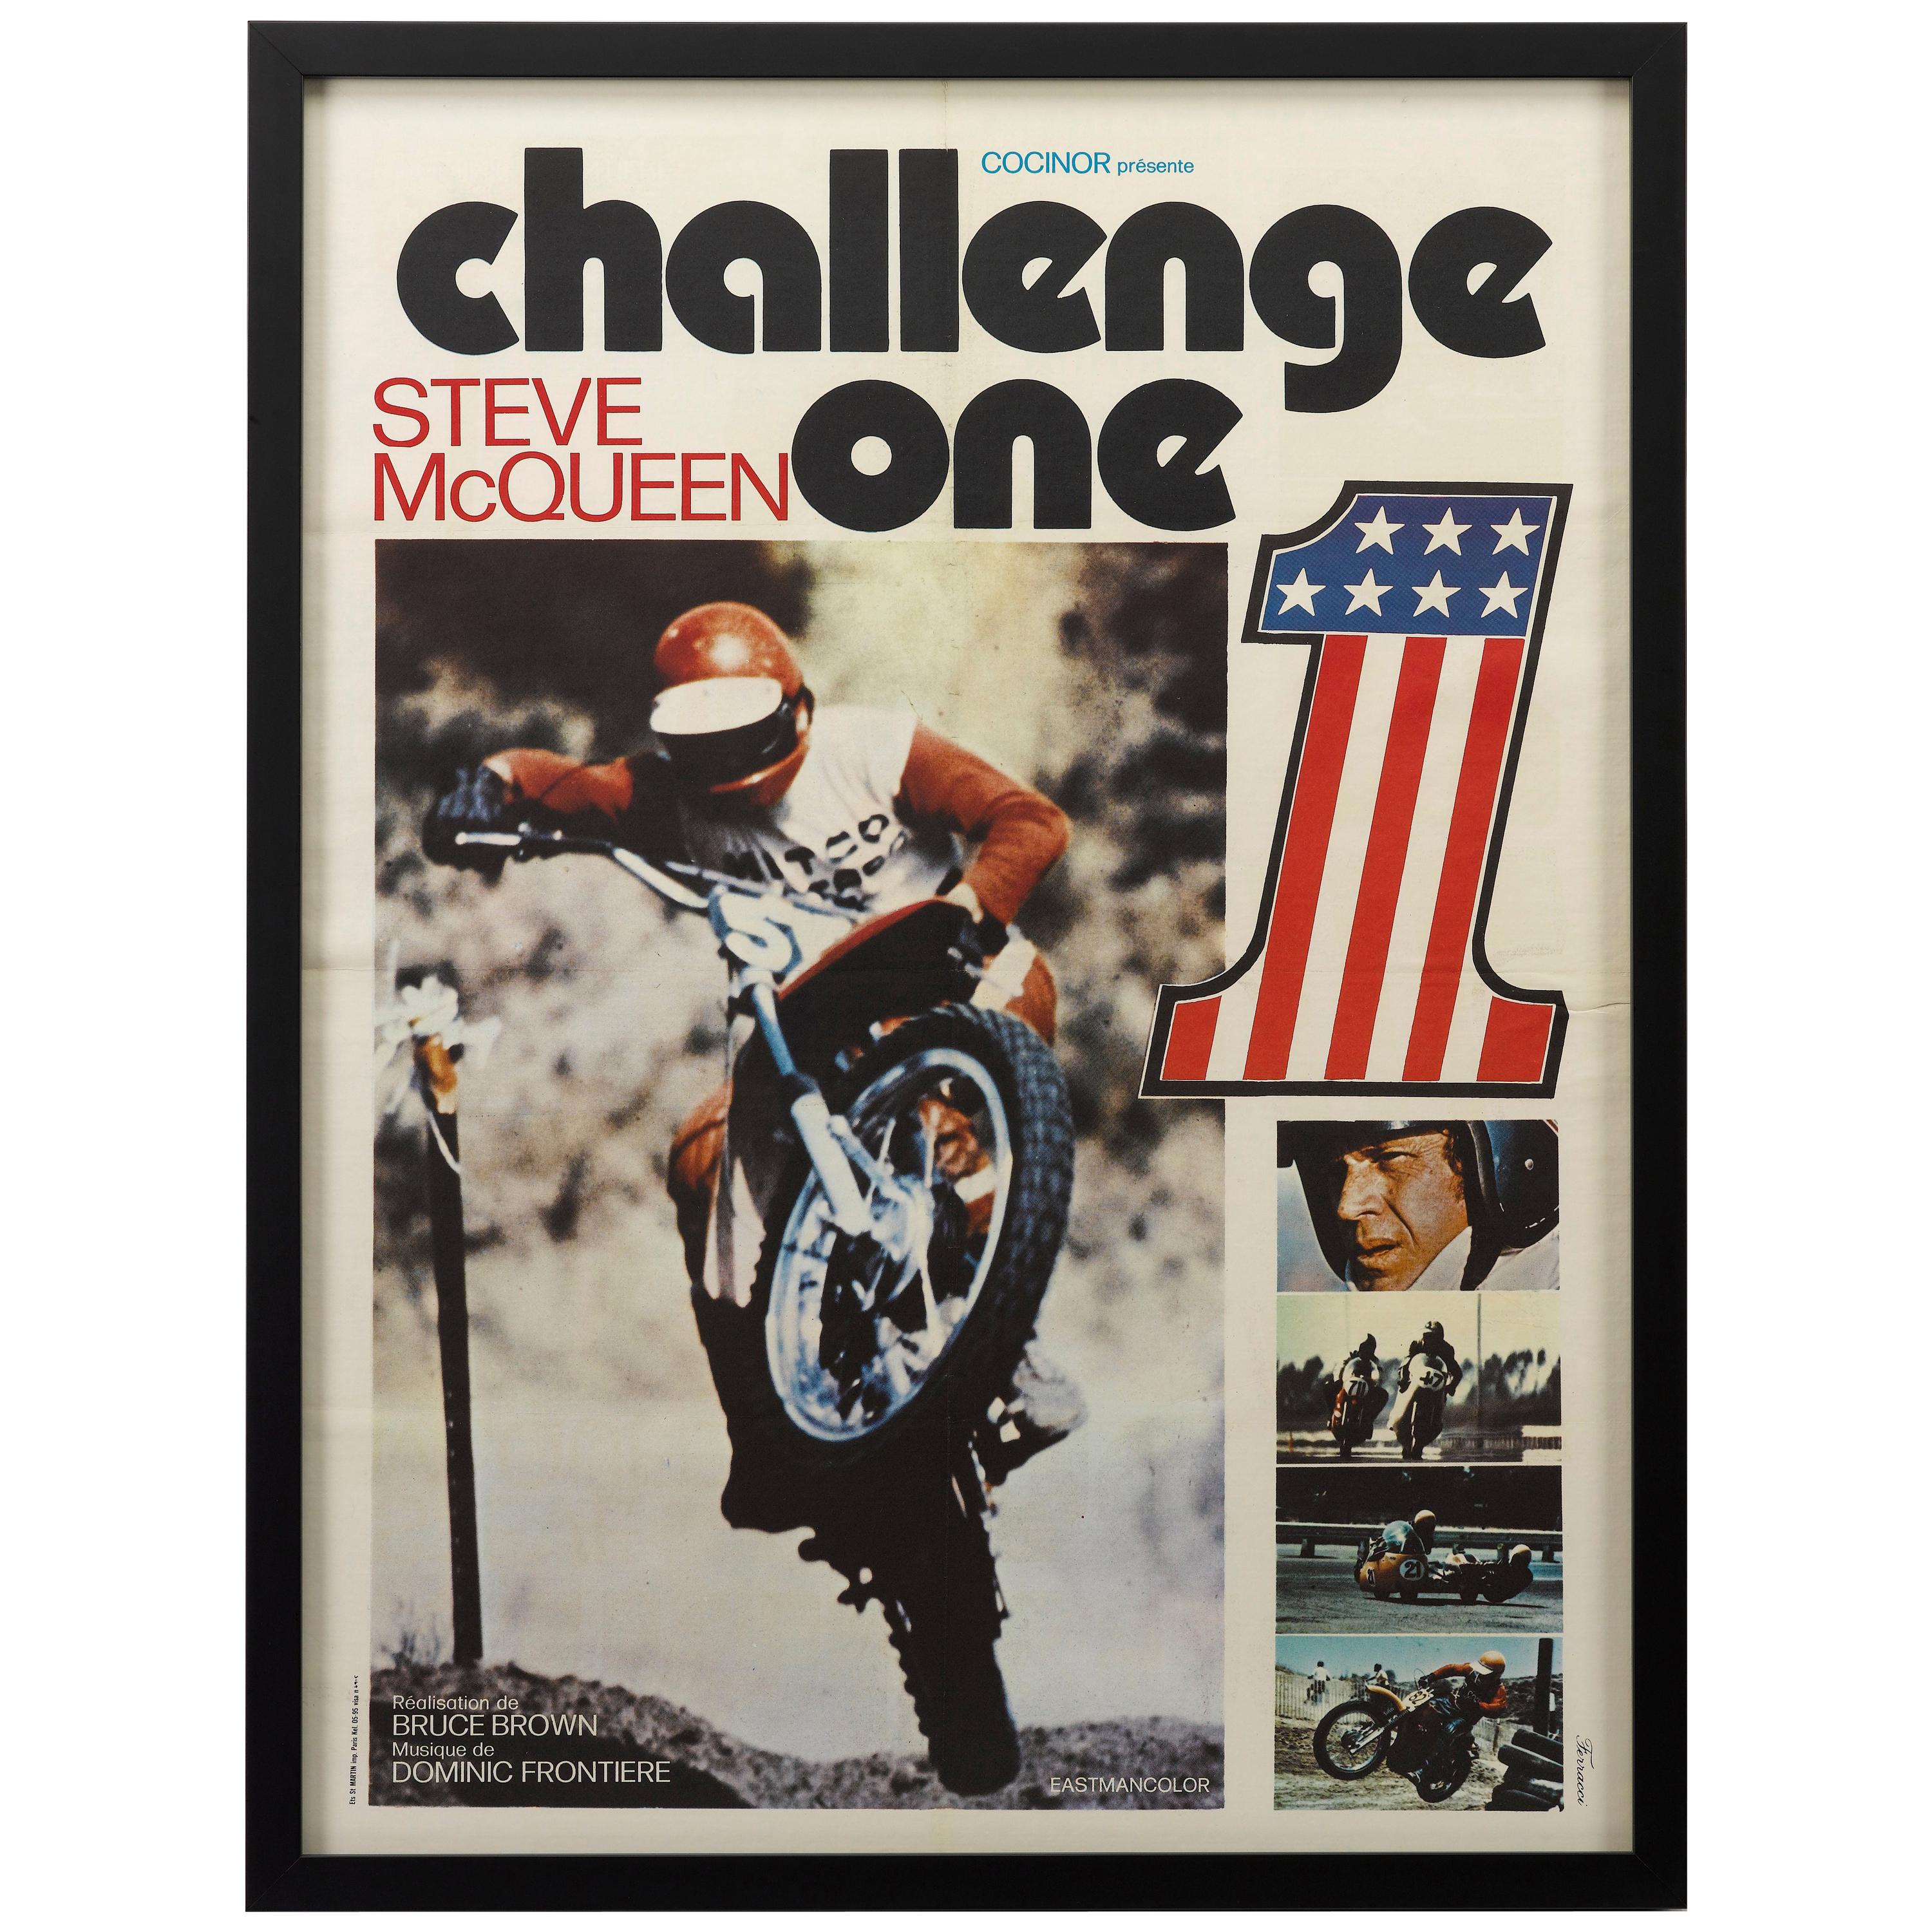 Steve McQueen "Challenge One" on Any Sunday Vintage Movie Poster, 1972